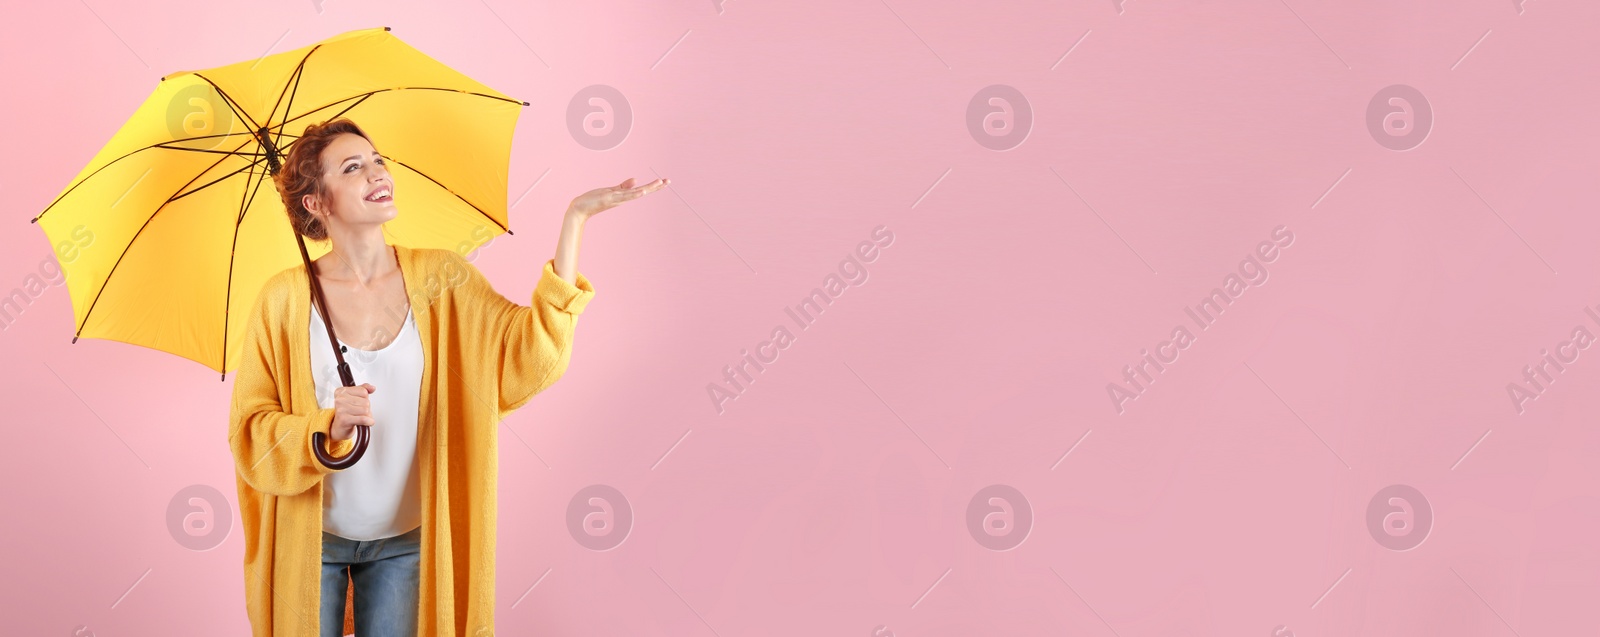 Image of Autumn season. Happy woman with yellow umbrella on pink background, space for text. Banner design